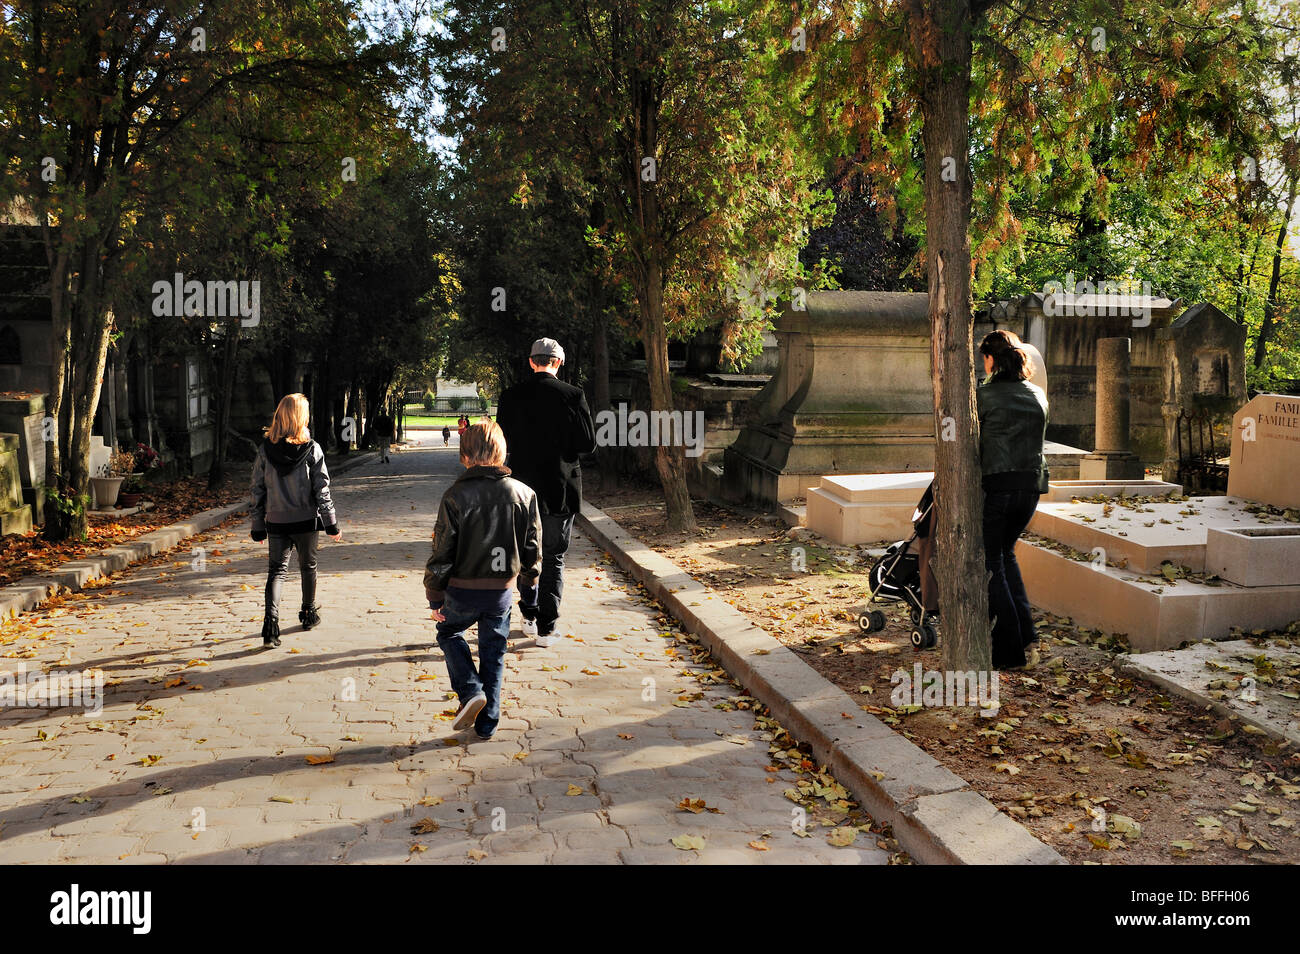 Paris, France - Street Scene, Young Family Walking from Behind Promenading in 'Pere Lachaise Cemetery', Autumn Stock Photo